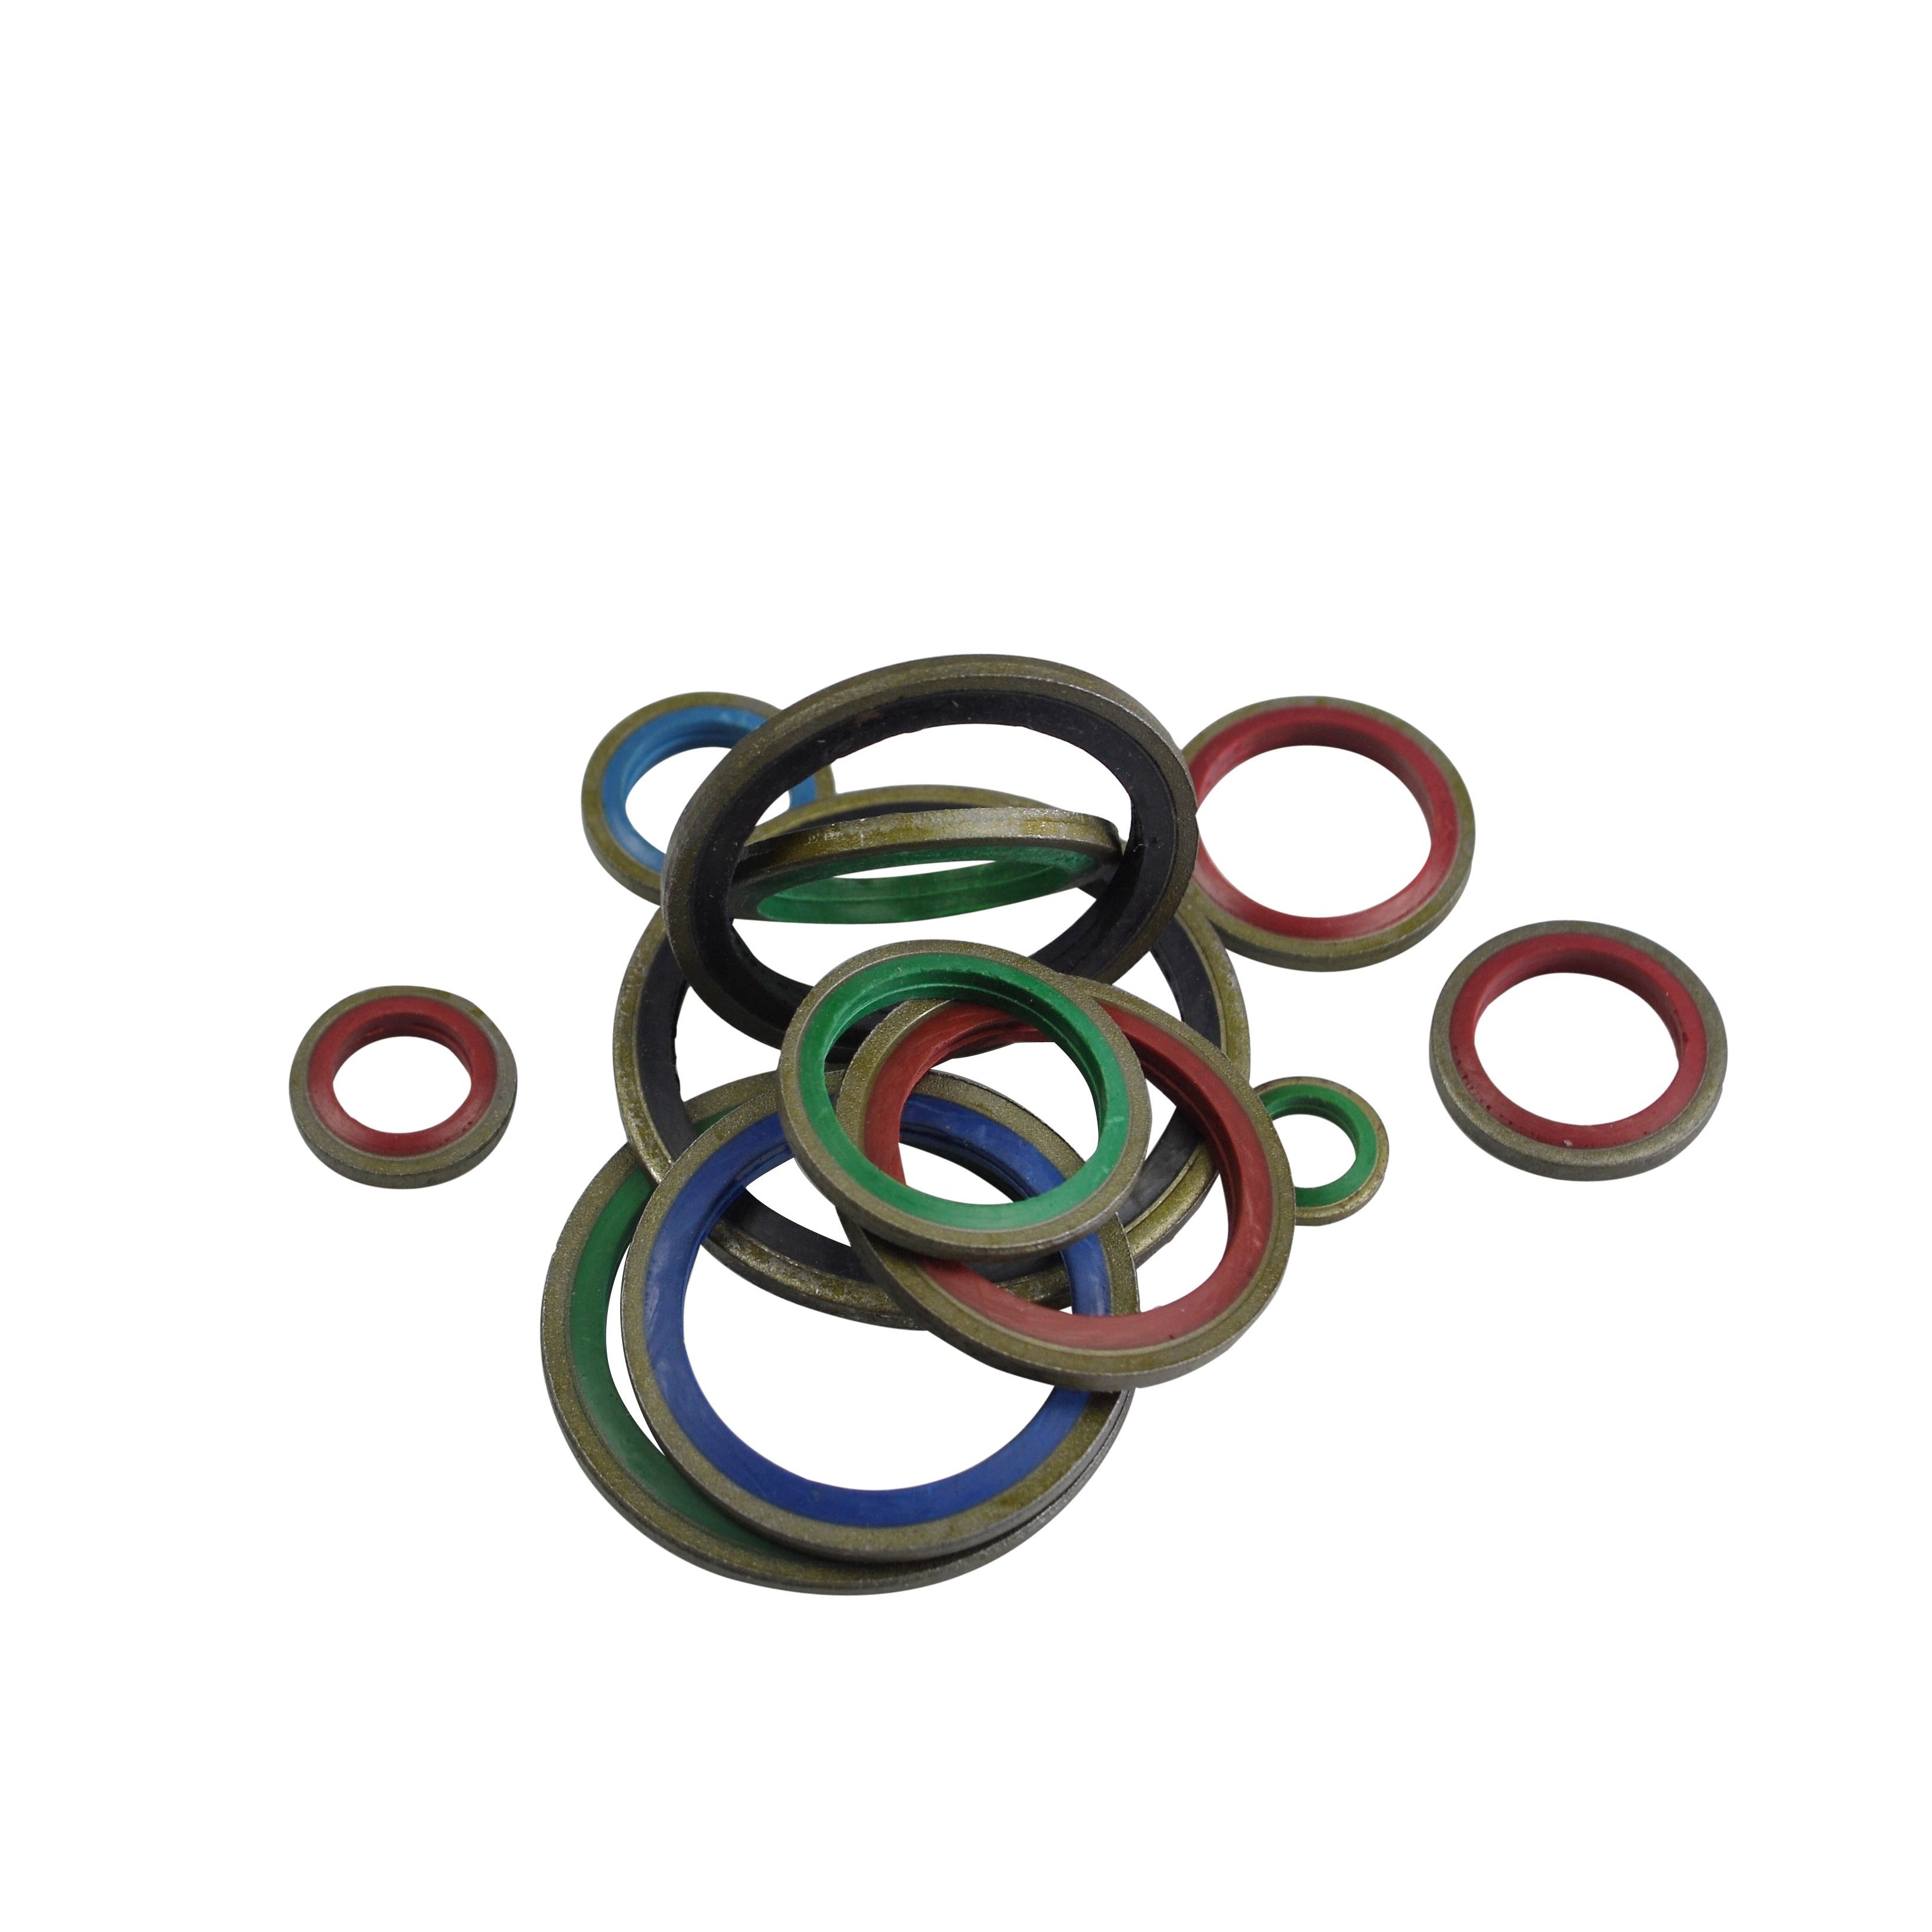 dowty washers bonded seals o-ring steel band fuel systems hydraulic equipment bolt banjo 240pc set punps plumbing assorted kit